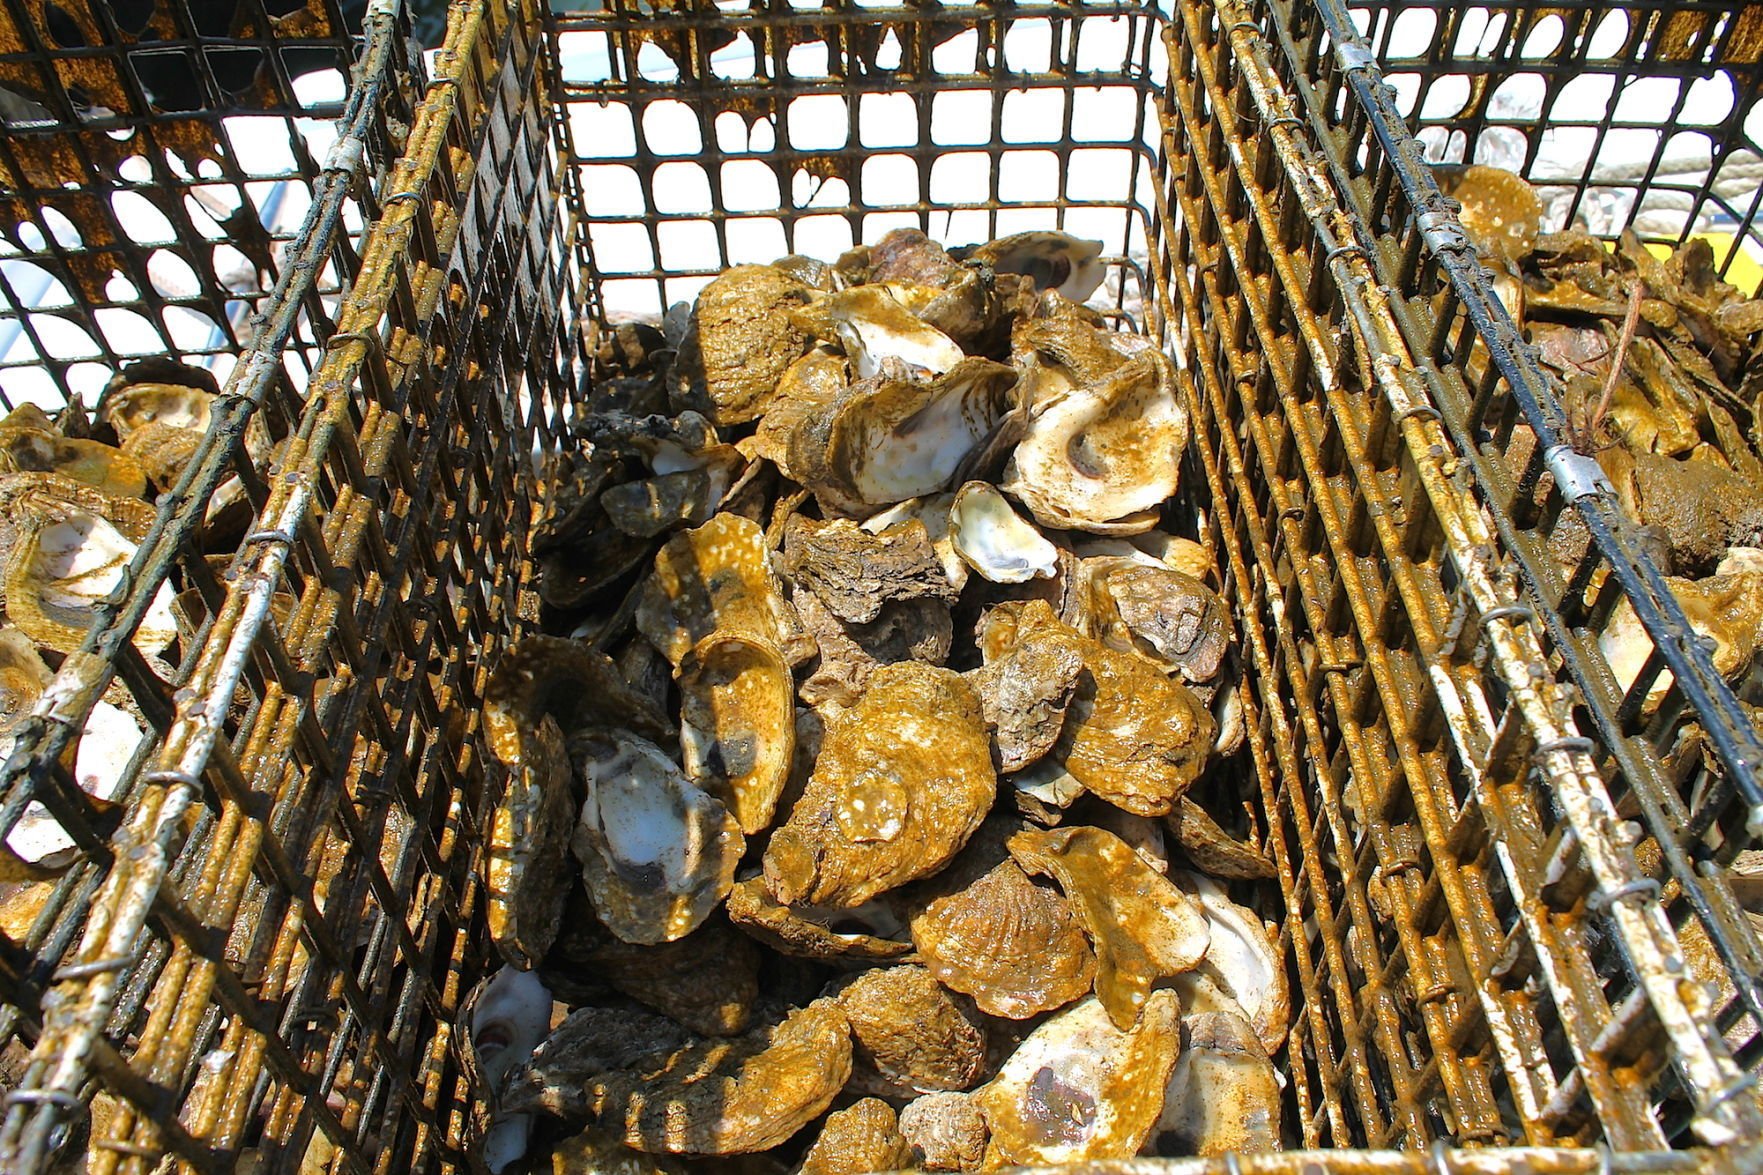 sieving oyster spat